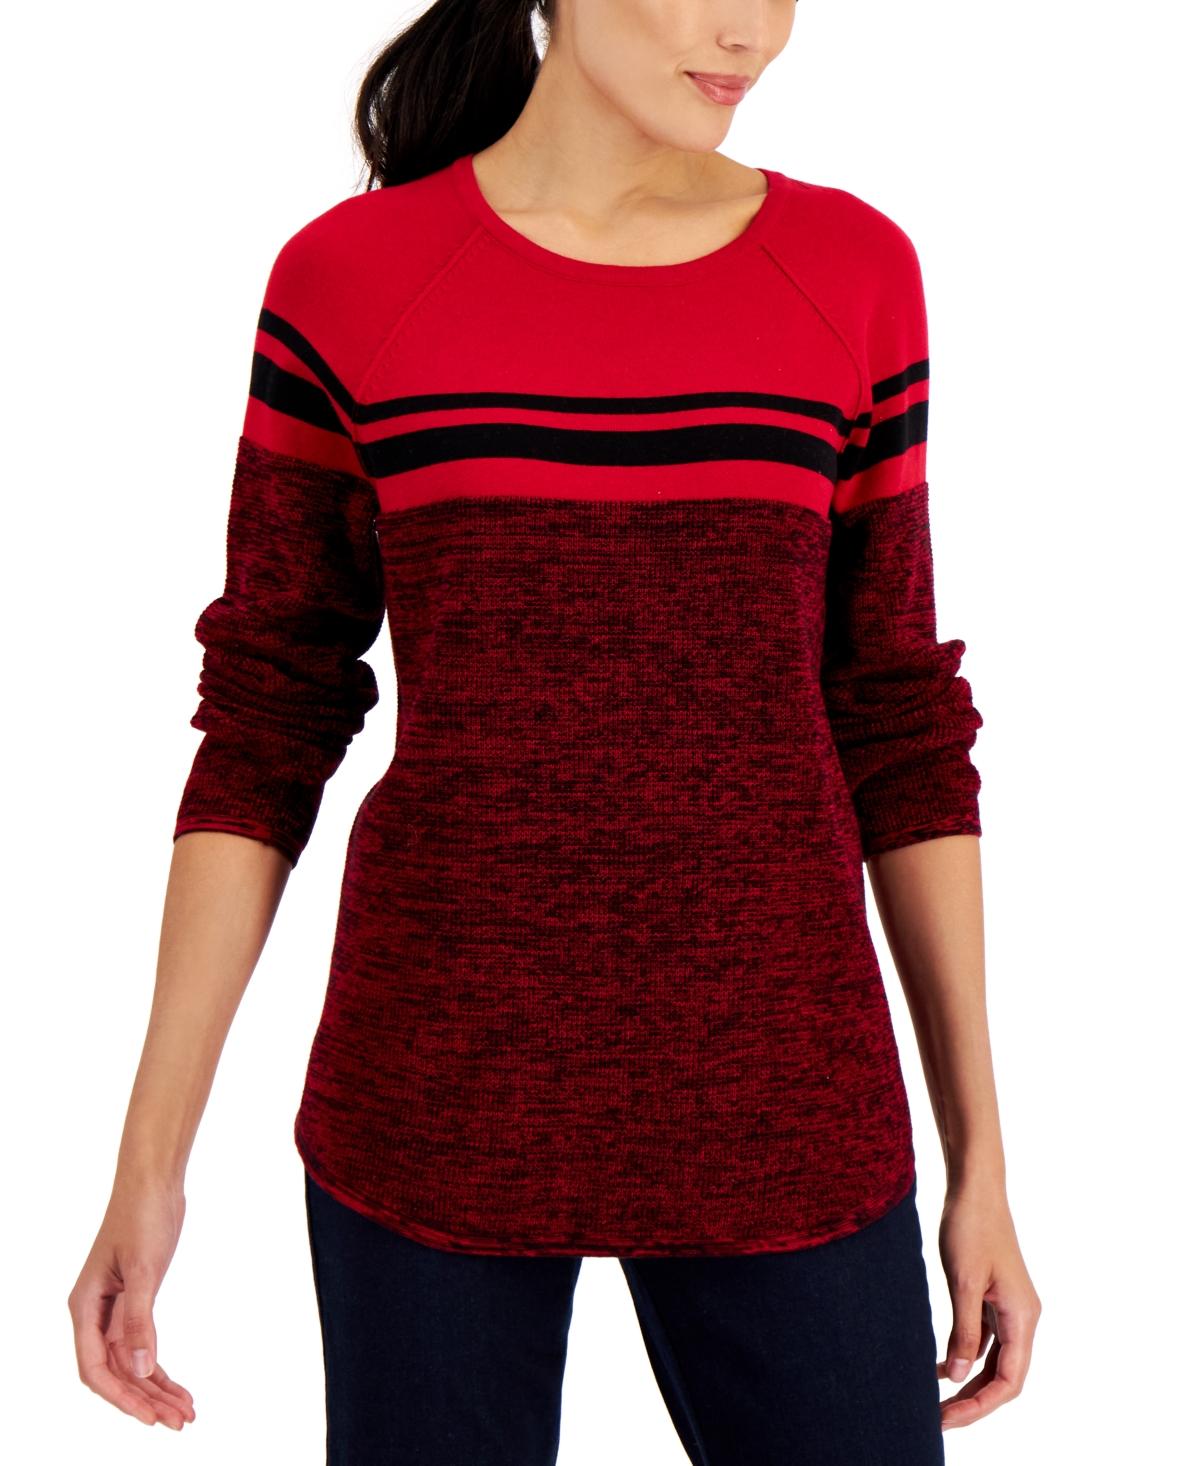 Women's Cotton Colorblocked Sweater, Created for Macy's - New Red Amore